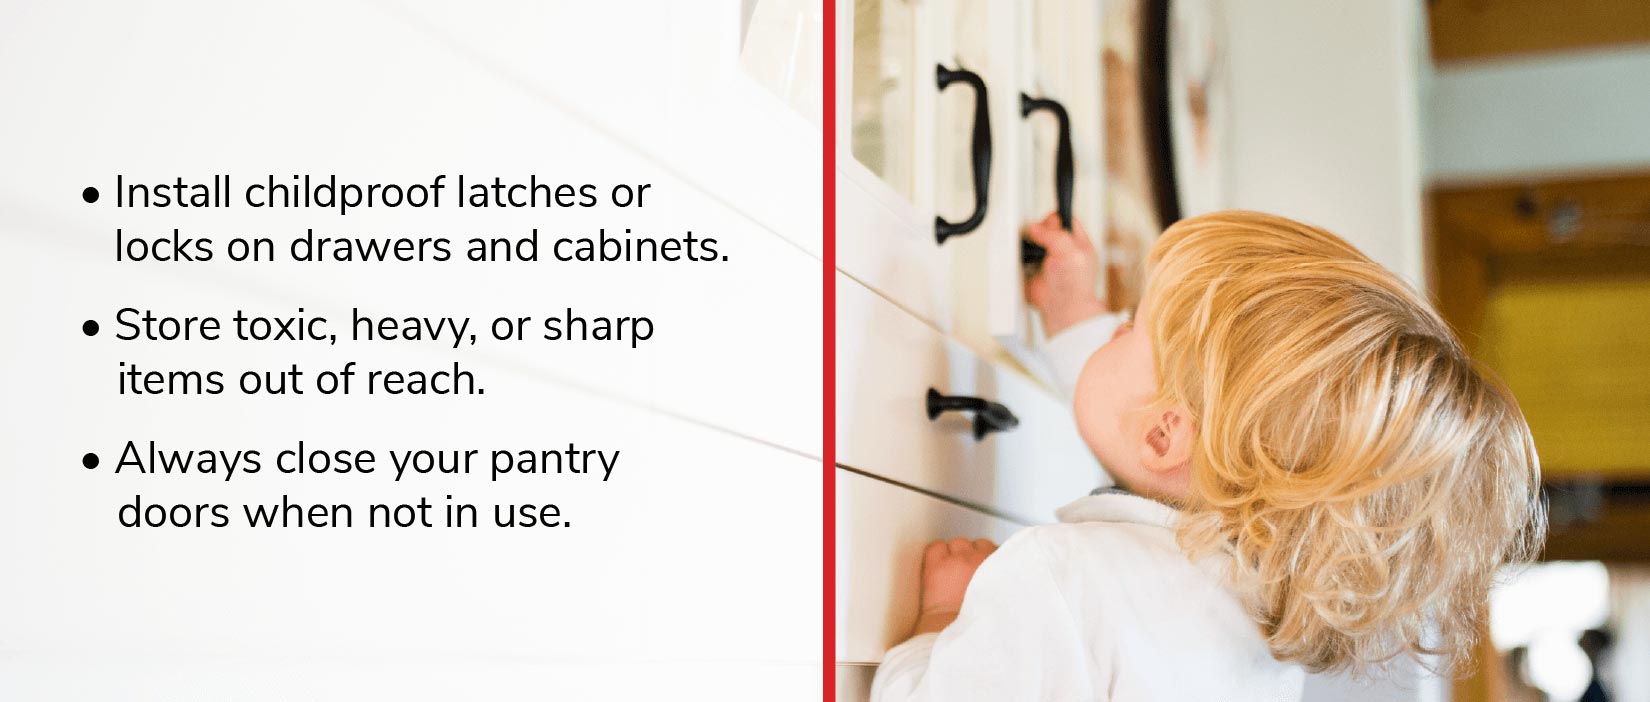 How to Babyproof Your Cabinets and Drawers